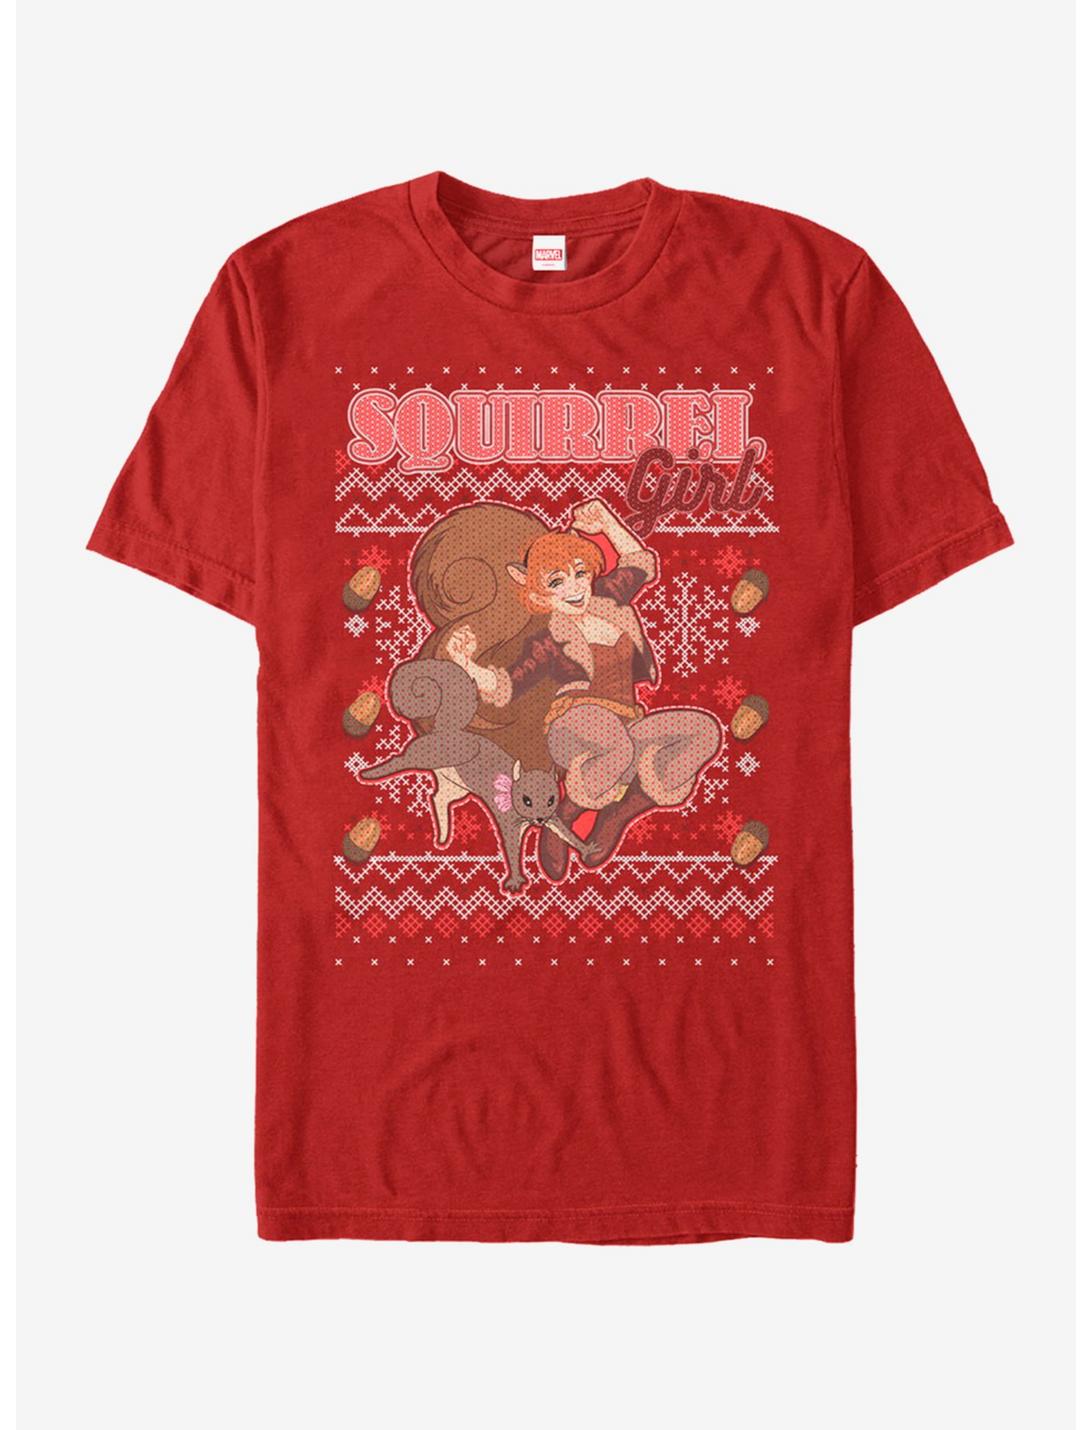 Marvel Squirrel Sweater T-Shirt, RED, hi-res